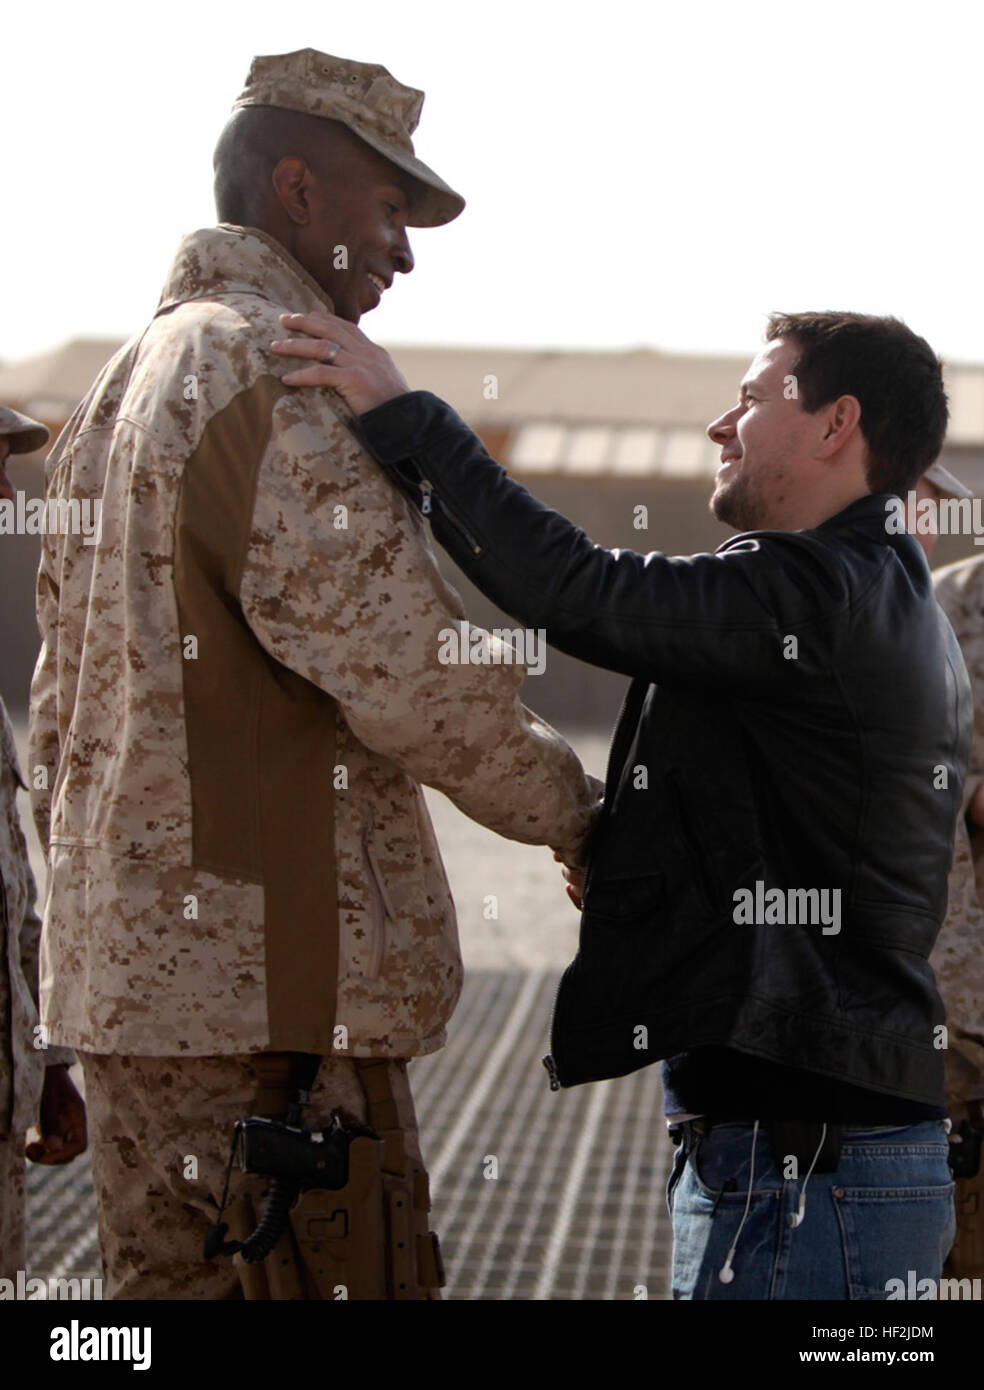 Maj. Larry Parker, executive officer, Headquarters and Service Company, 1st Marine Logistics Group (Forward), shakes hands with actor Mark Wahlberg during Wahlberg's visit to Camp Leatherneck, Afghanistan, Dec. 19. Wahlberg shook hands and took pictures with service members while thanking them for their service. More than 100 anxious fans waited in line to meet Wahlberg. Mark Wahlberg and Marine Major Larry Parker in Afghanistan Stock Photo